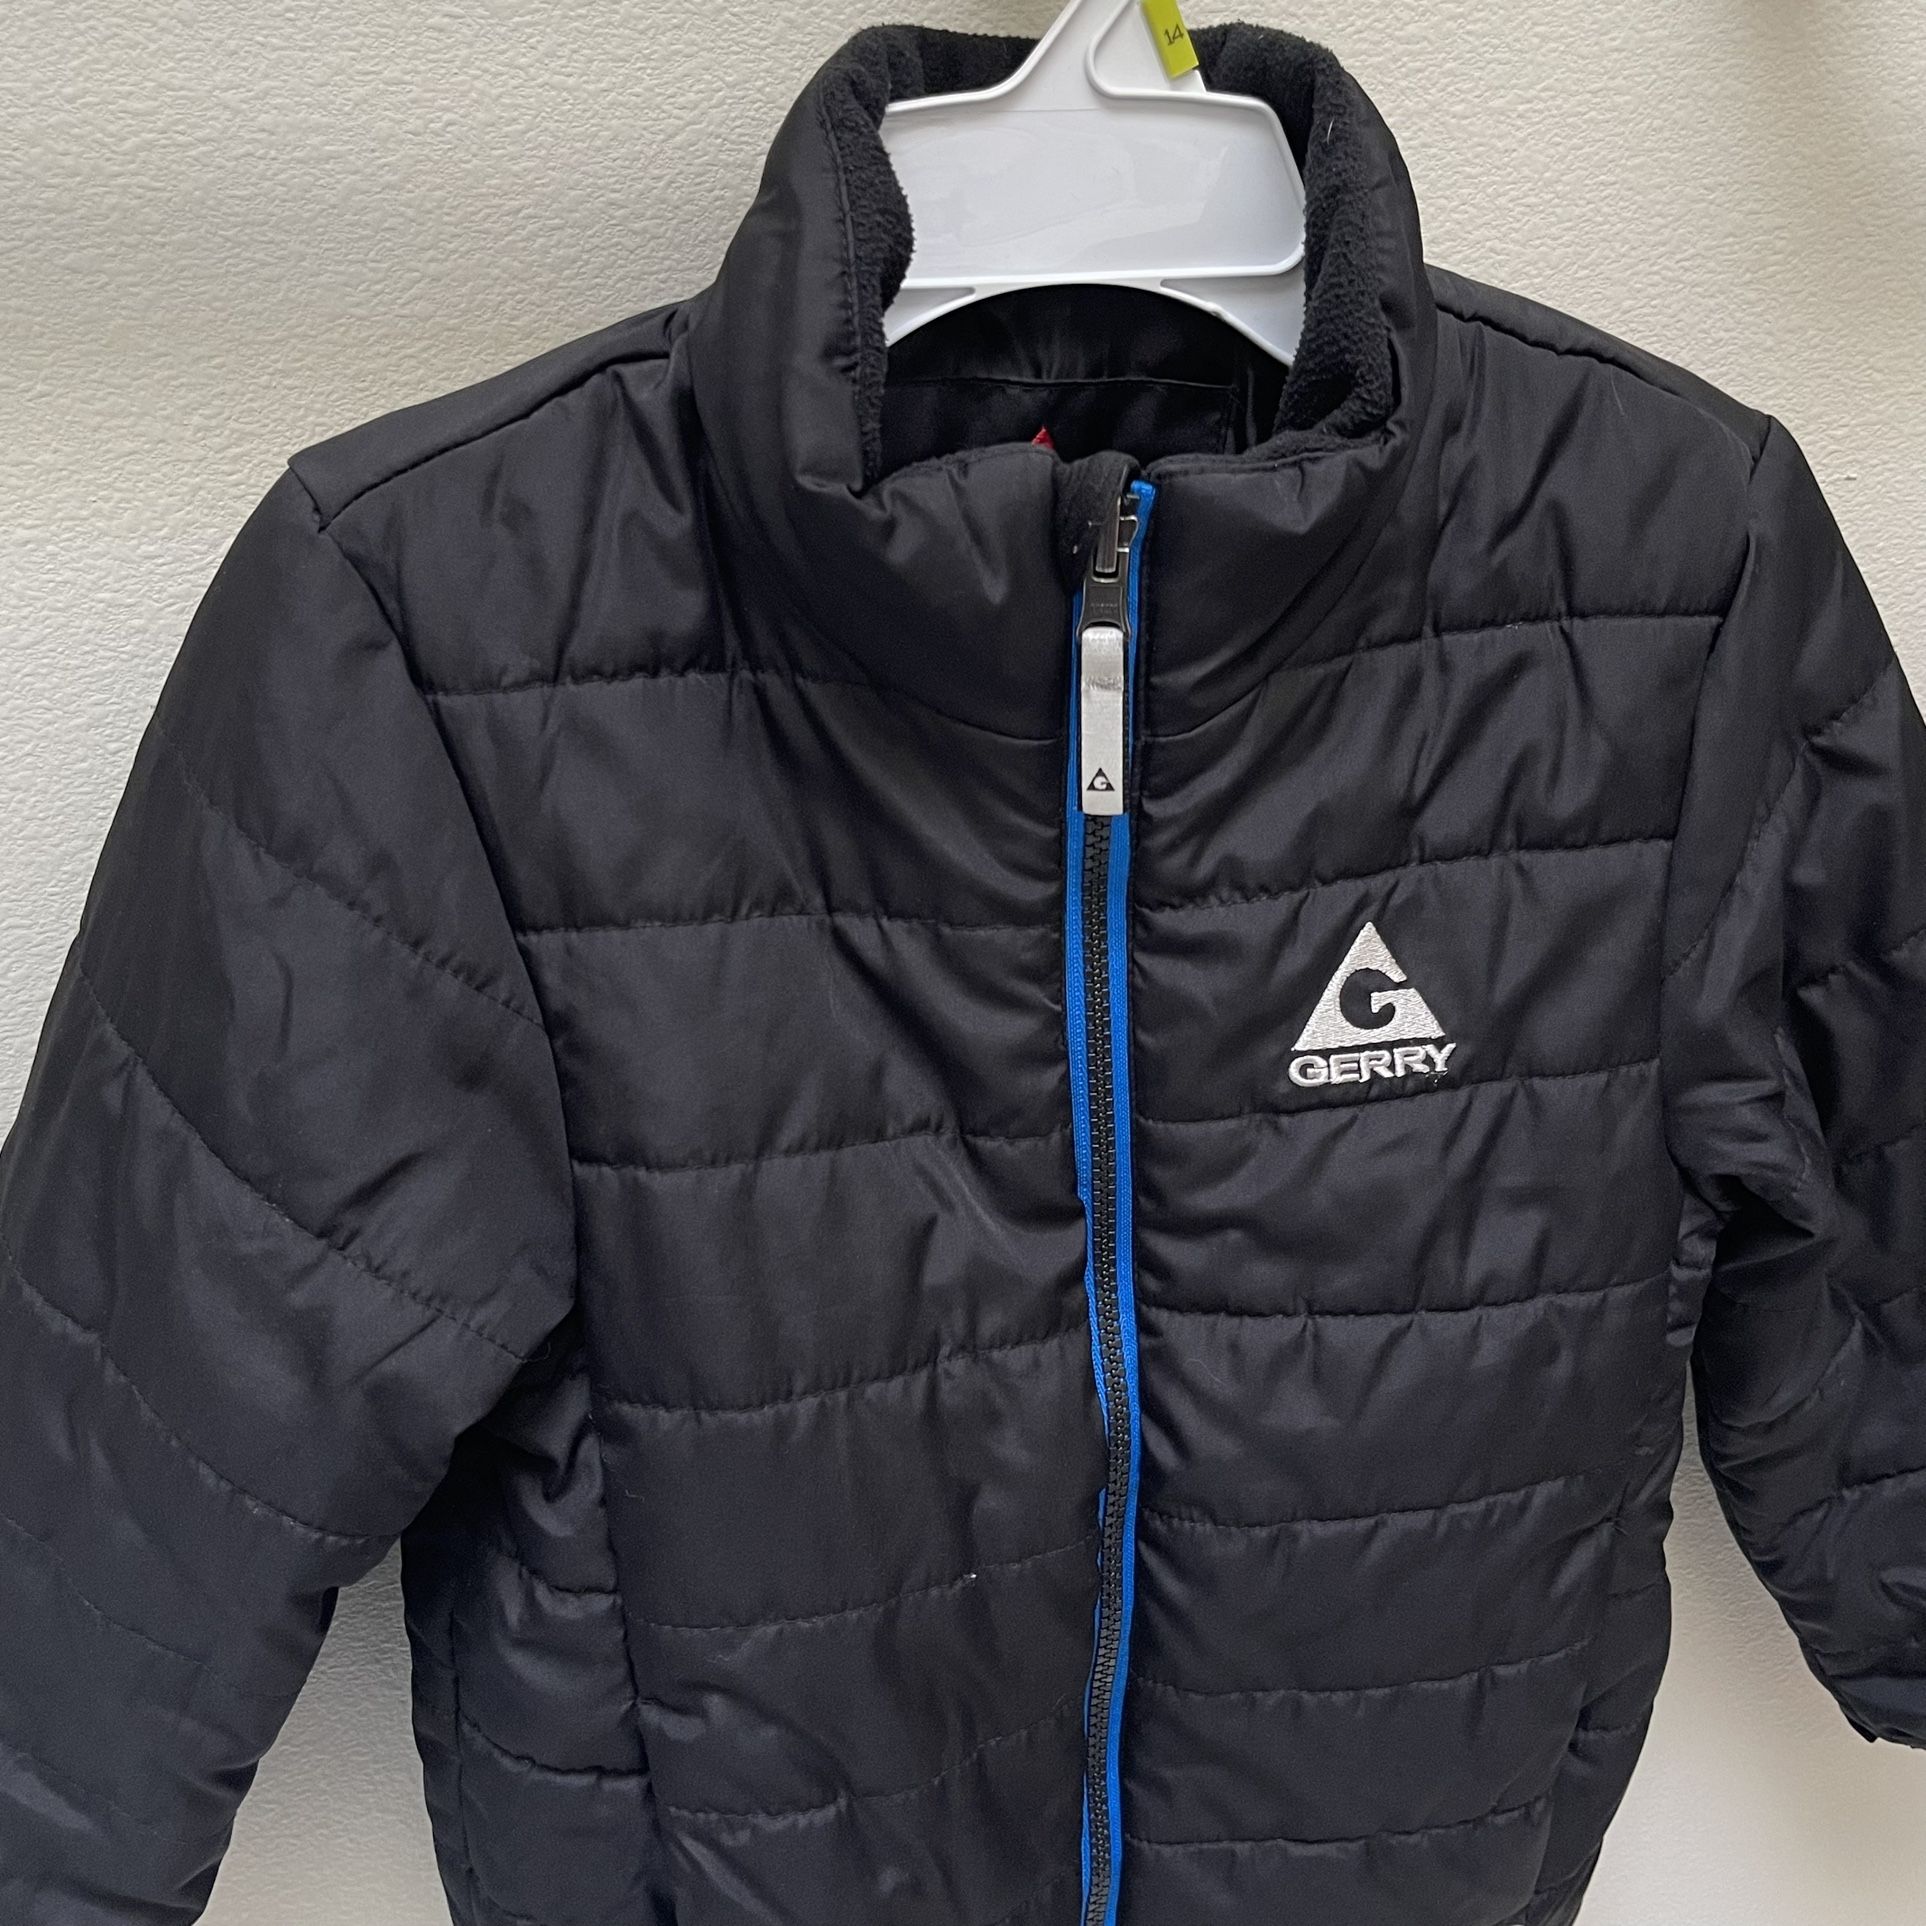 Youth XS (5-6) Gerry Puffer Jacket for Sale in Bothell, WA - OfferUp